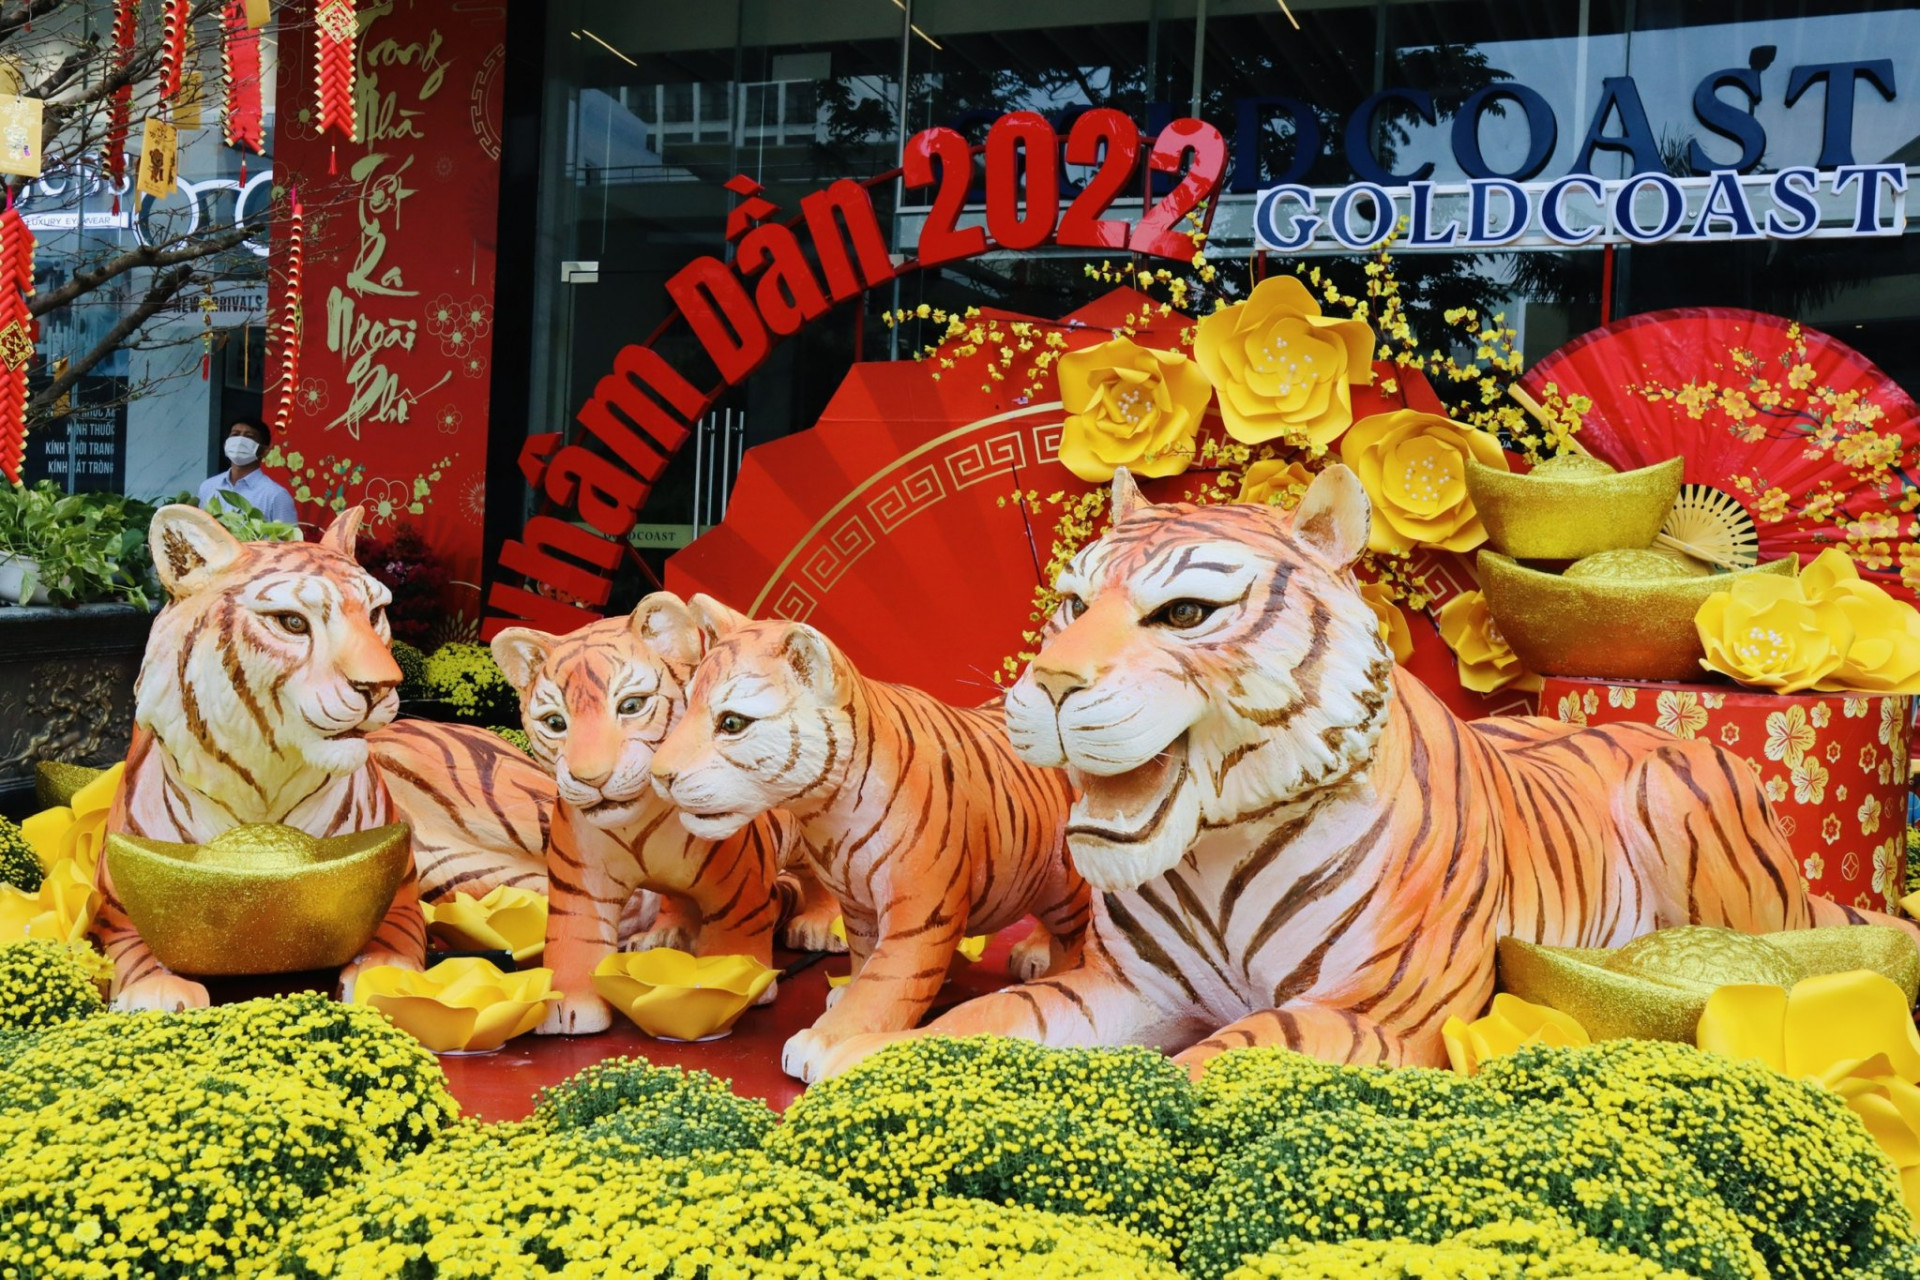 A family of tigers in front of Gold Coast Nha Trang